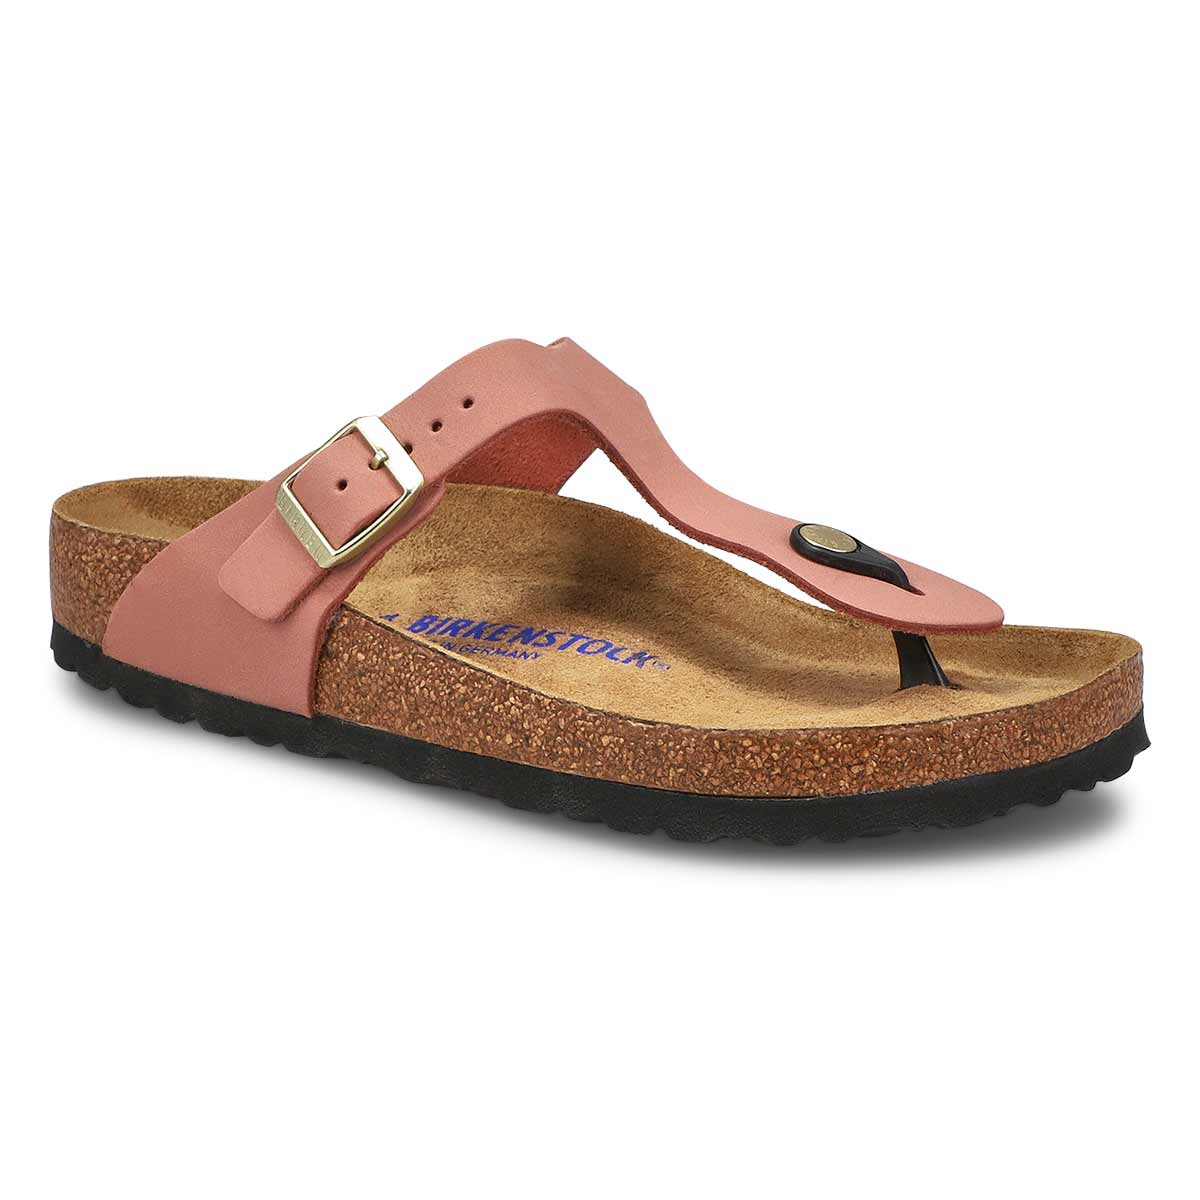 Birkenstock Gizeh Oiled Leather Braided Sandals